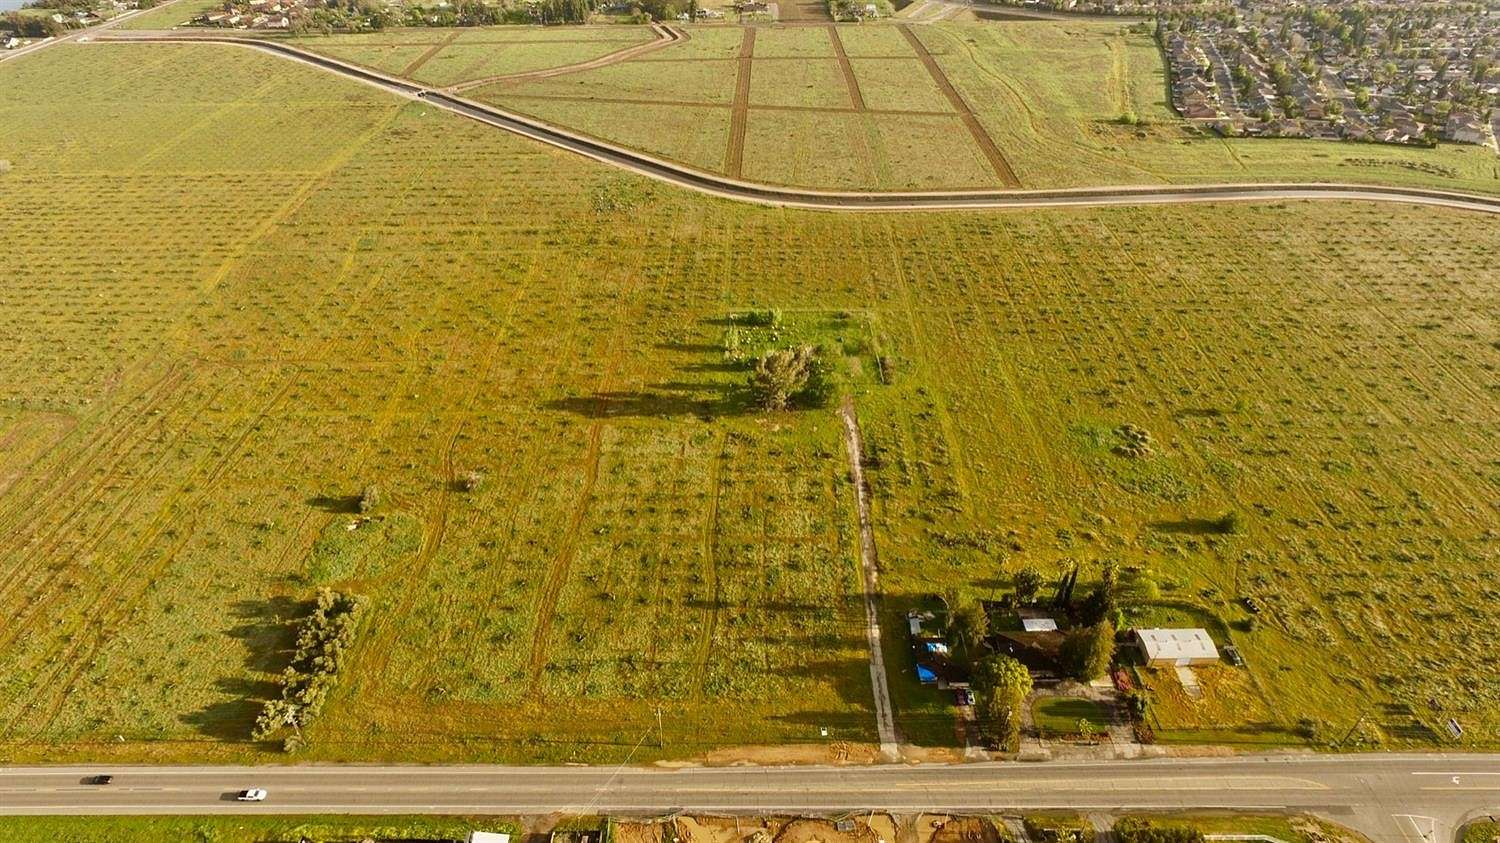 18.91 Acres of Mixed-Use Land for Sale in Fresno, California